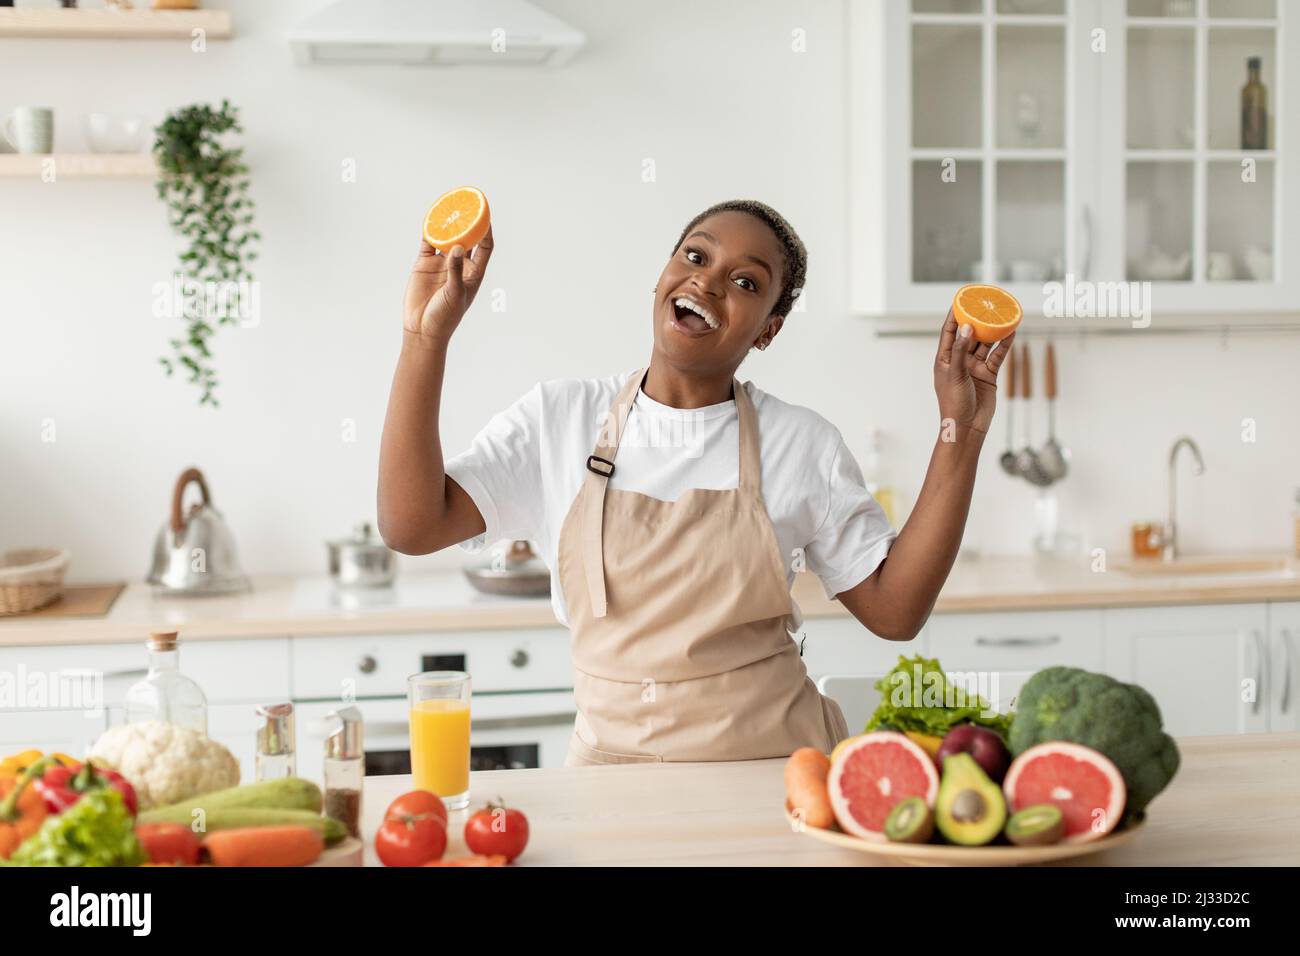 Glad emotional young black woman in apron have fun on minimalist kitchen interior, holds oranges Stock Photo